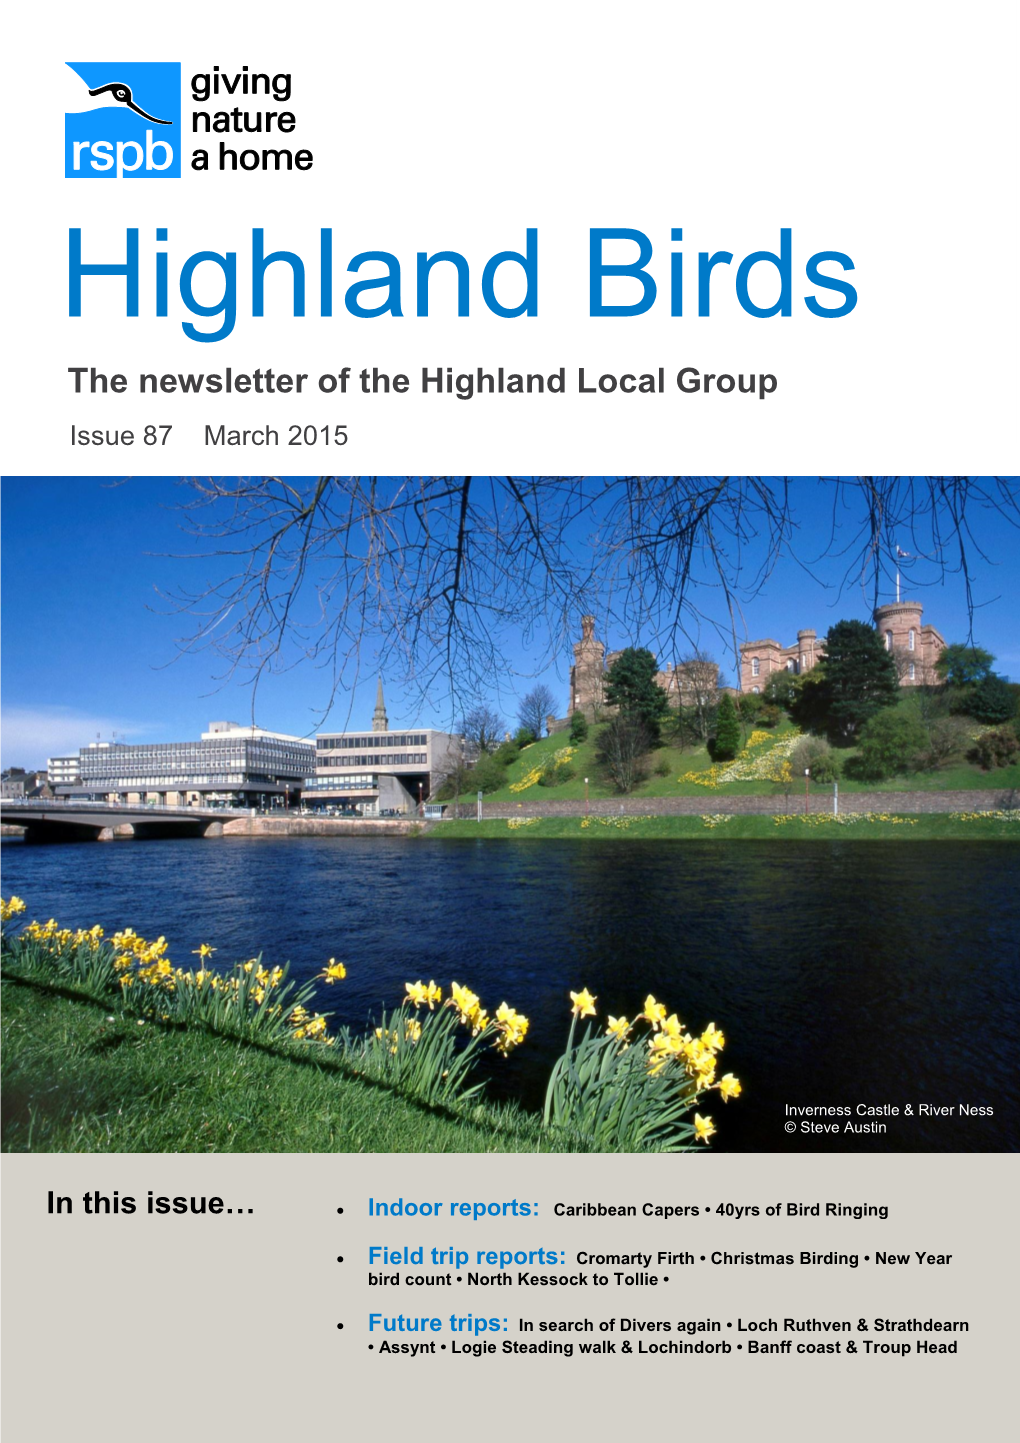 The Newsletter of the Highland Local Group Issue 87 March 2015